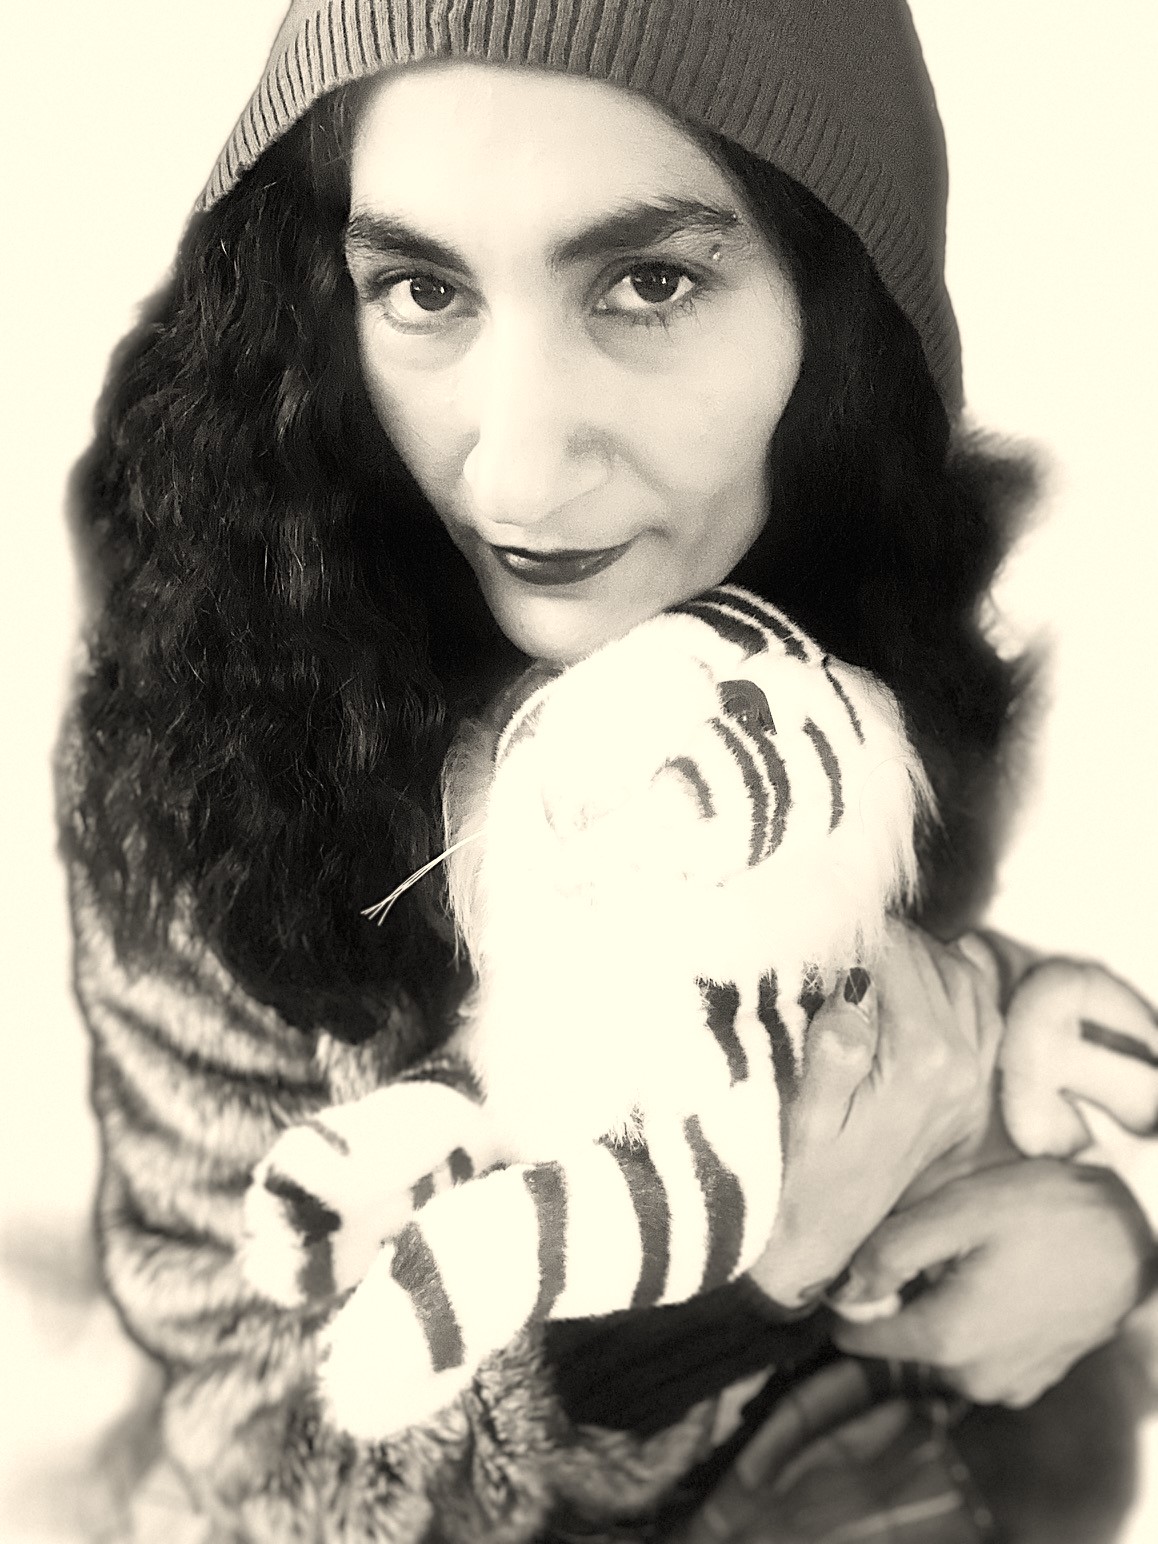 VAL, MAKER -FE DEVELOPER- Image with stuffed animal Siberian Tiger in Black and White